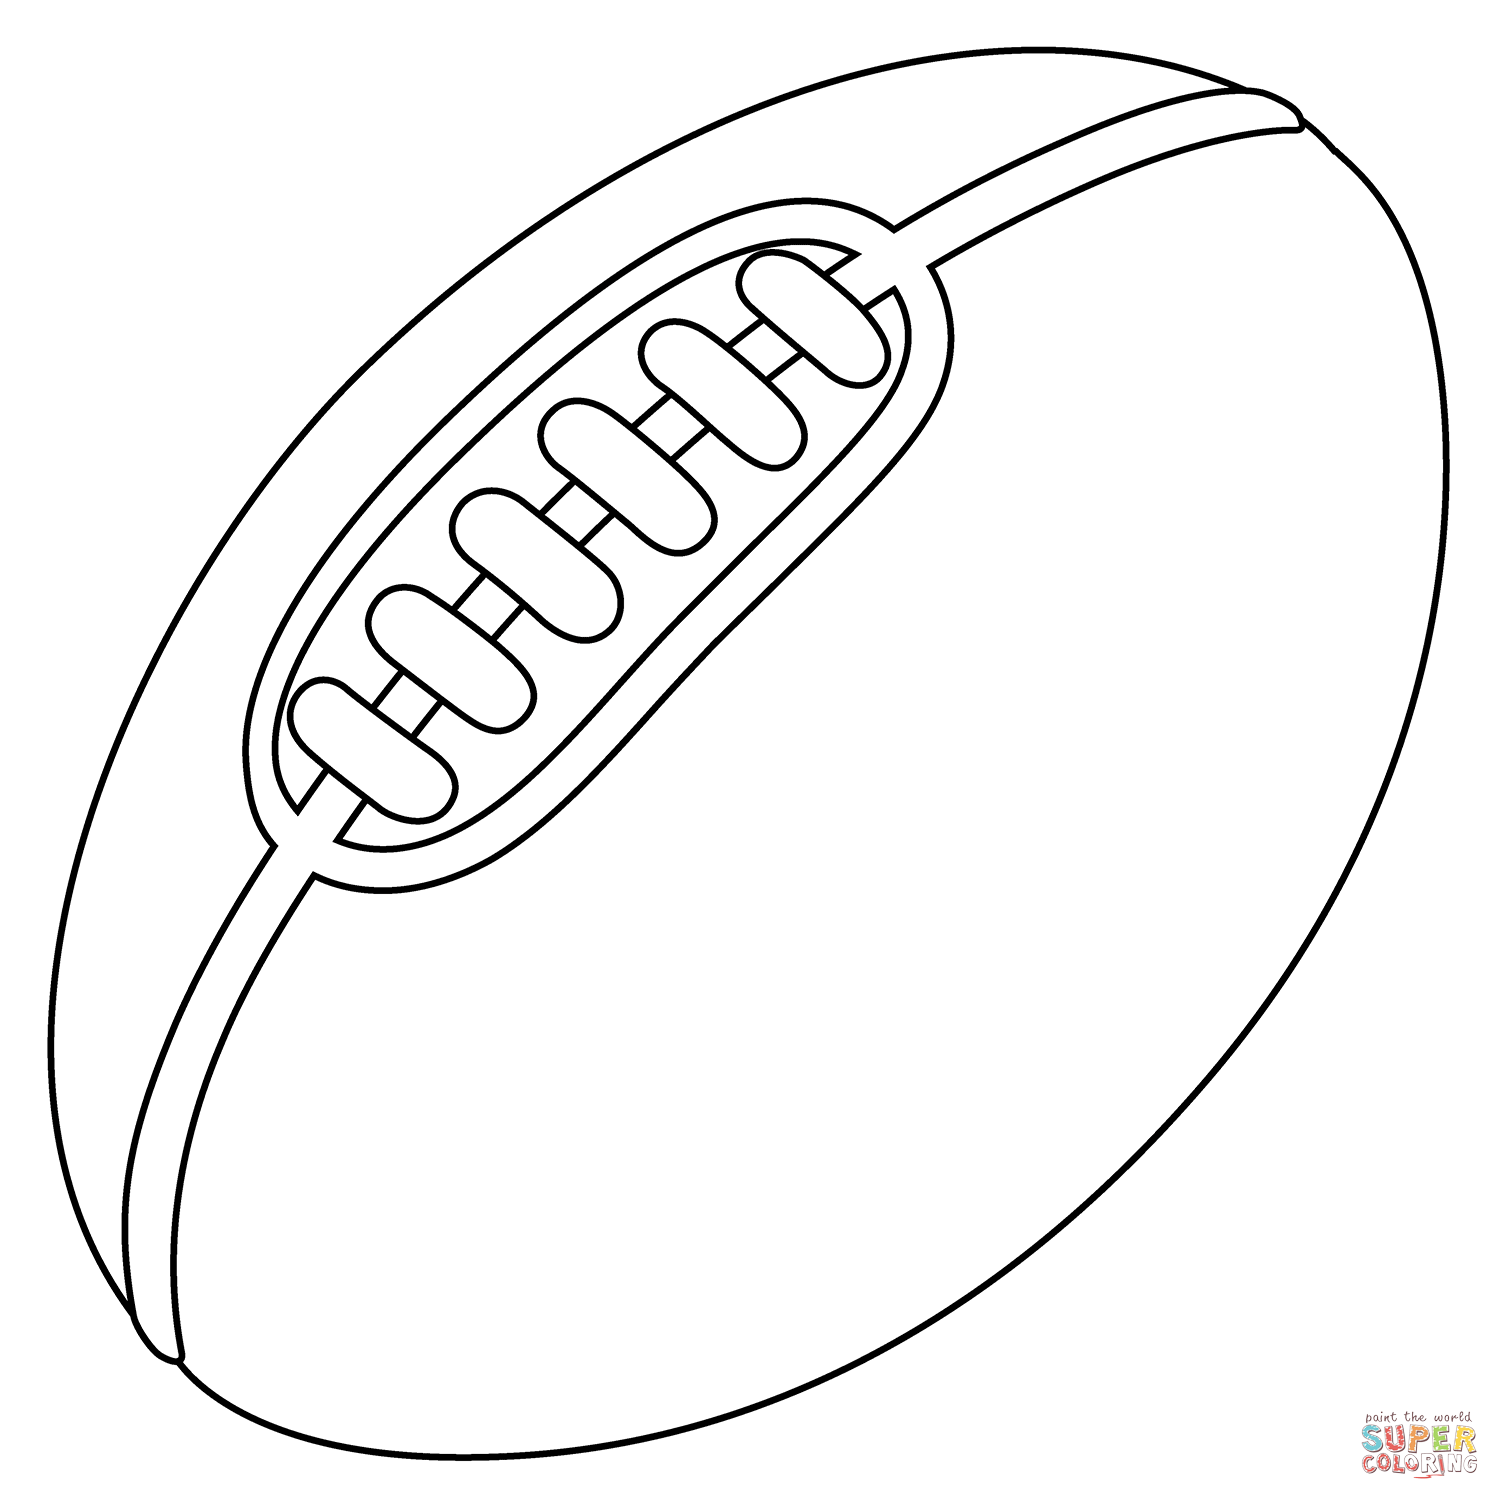 Rugby football emoji coloring page free printable coloring pages